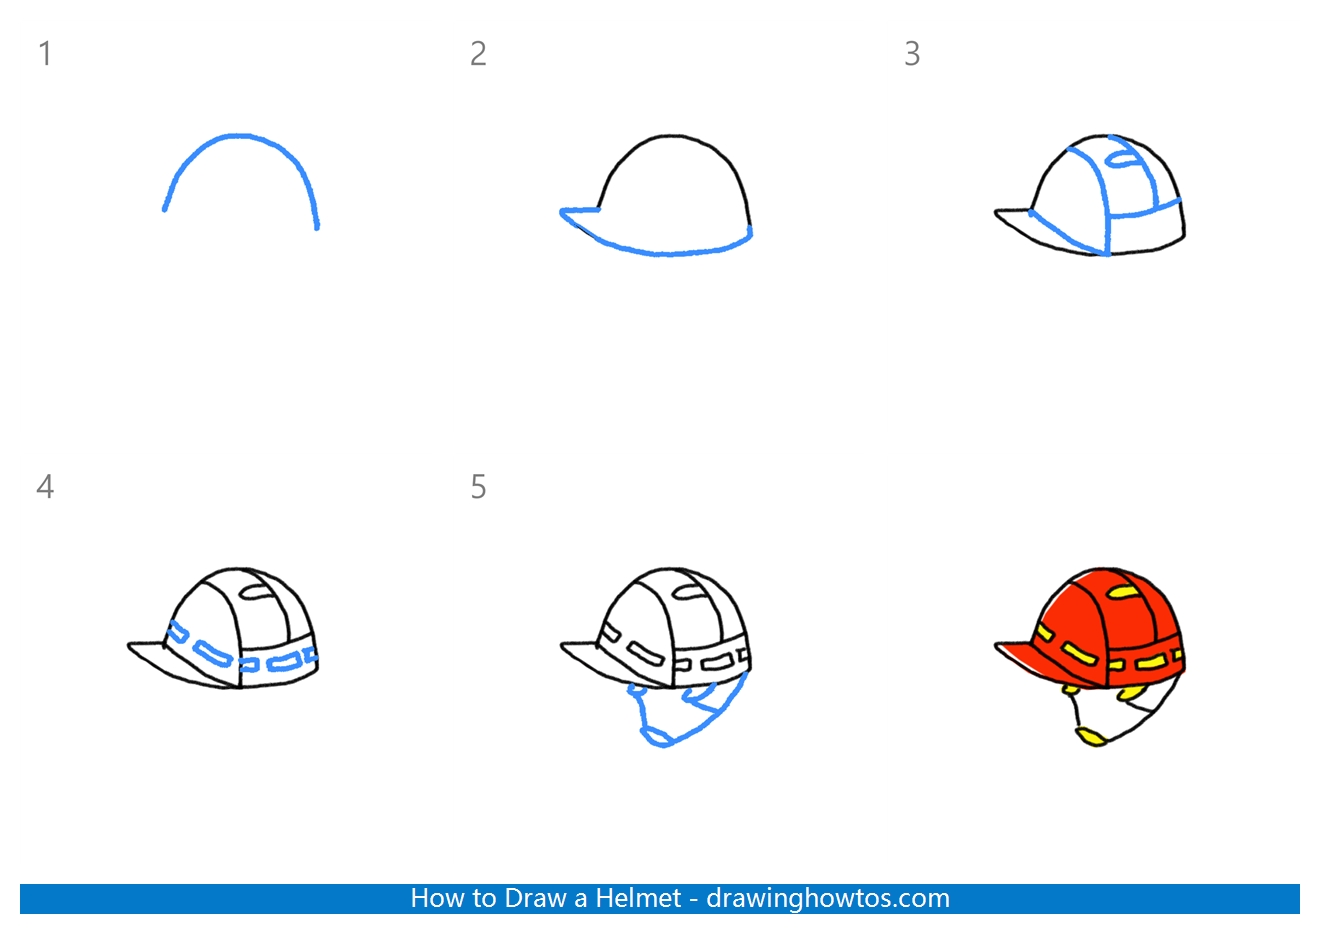 How to Draw a Helmet Step by Step